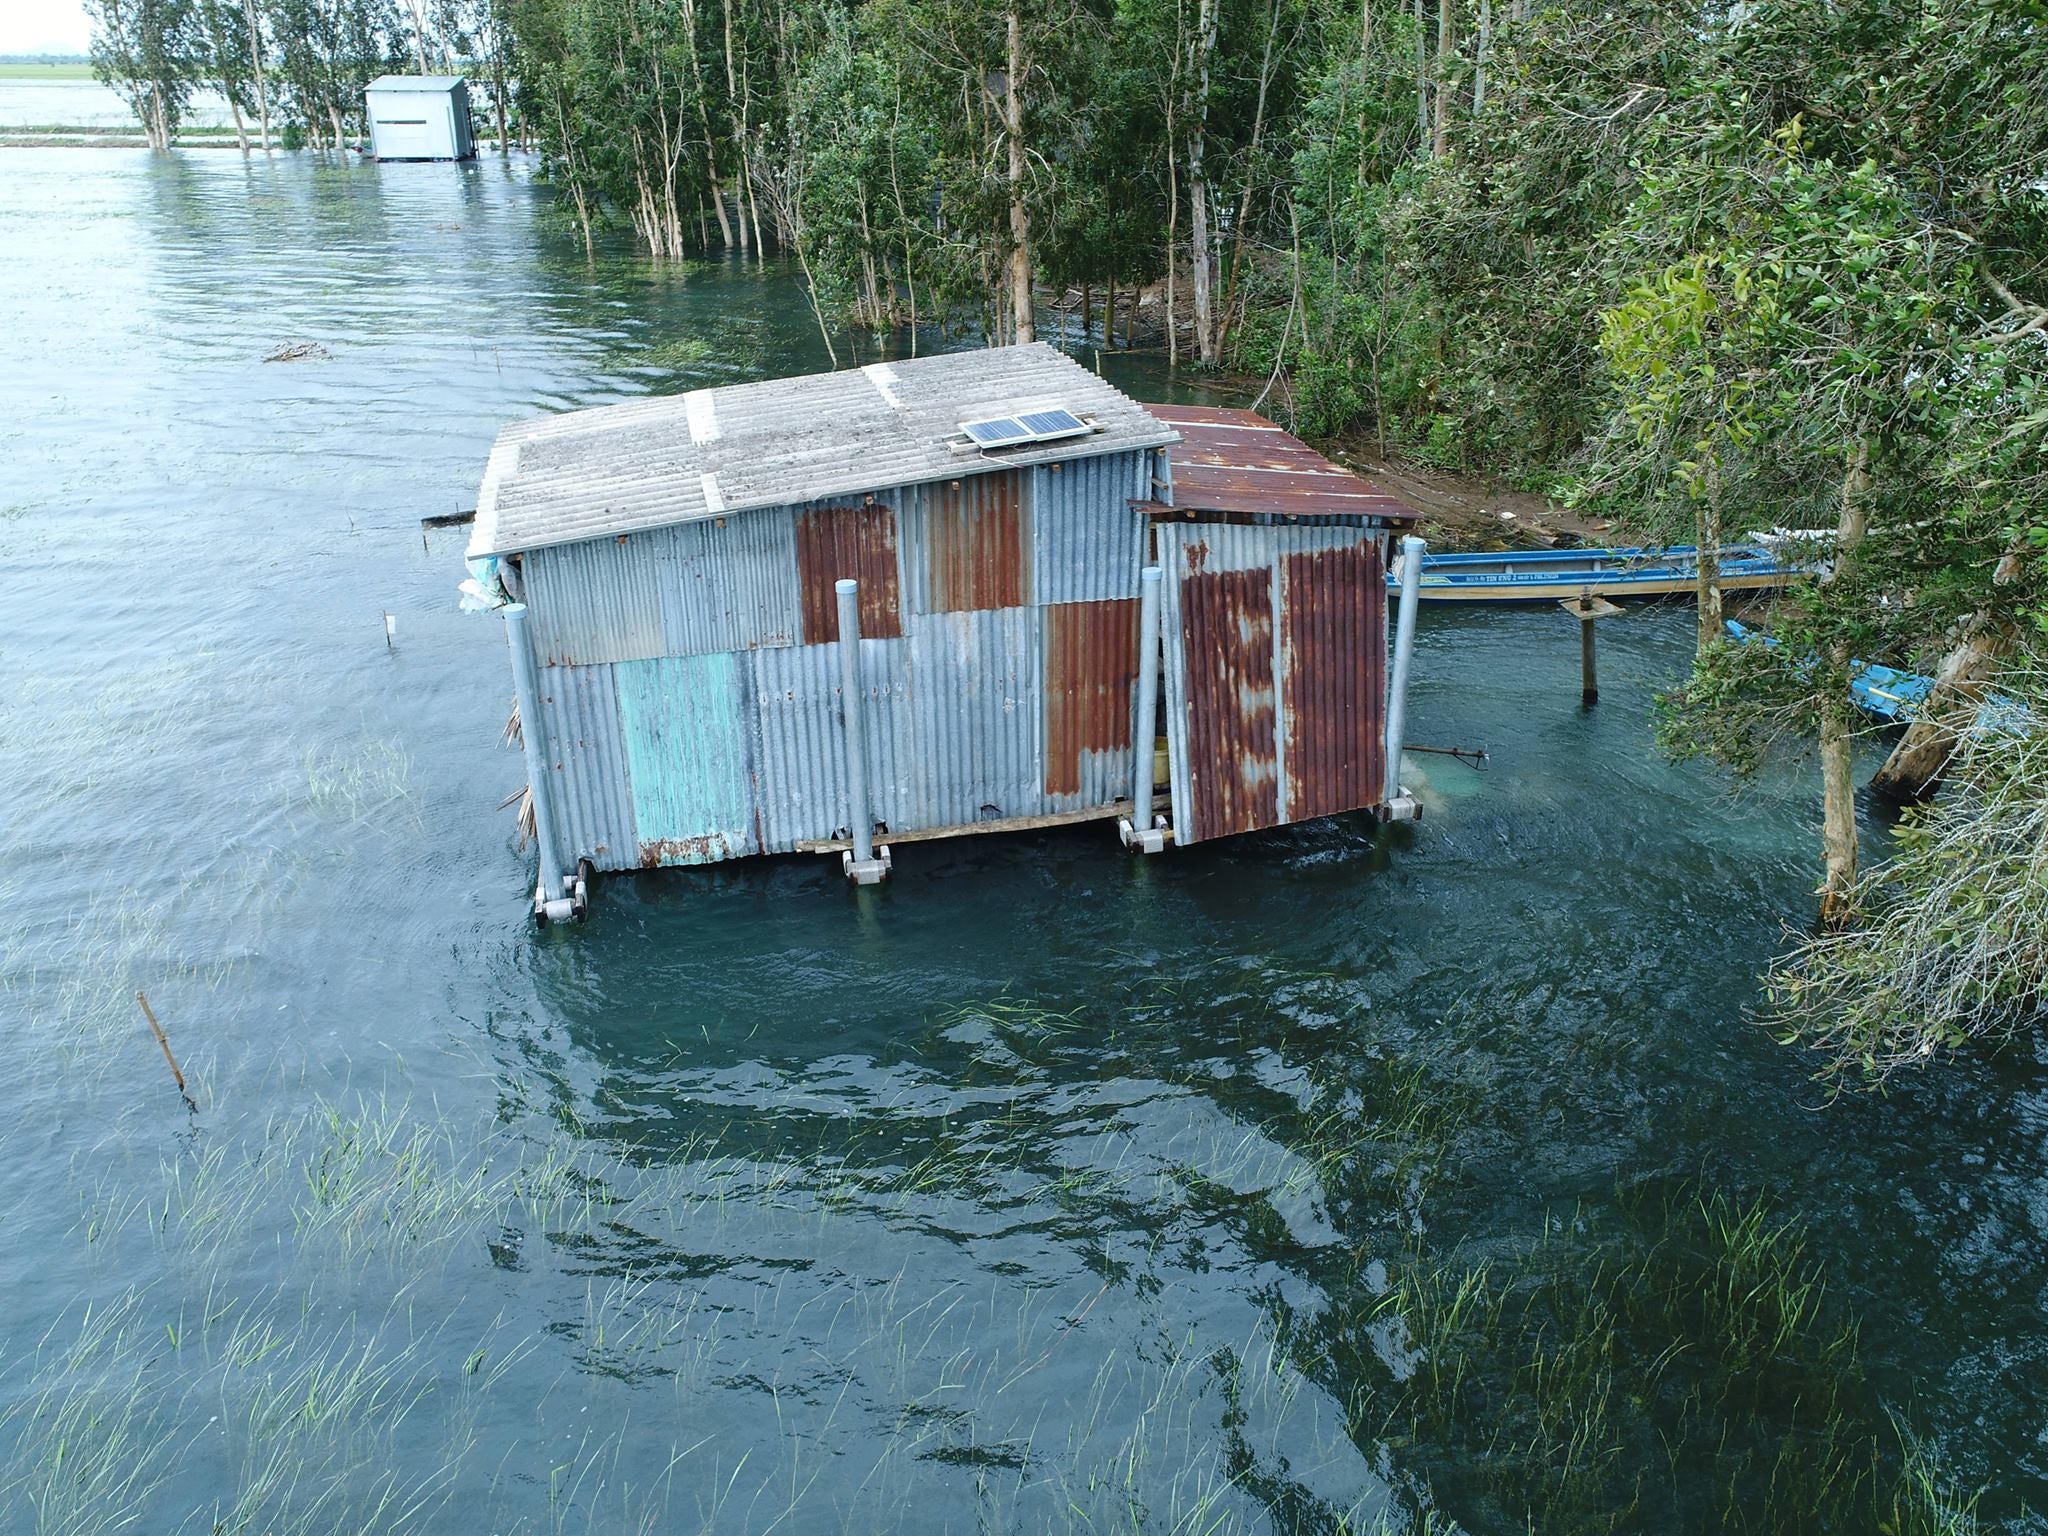 The second amphibious retrofit house in An Giang Province floating during the monsoon flood in 2018